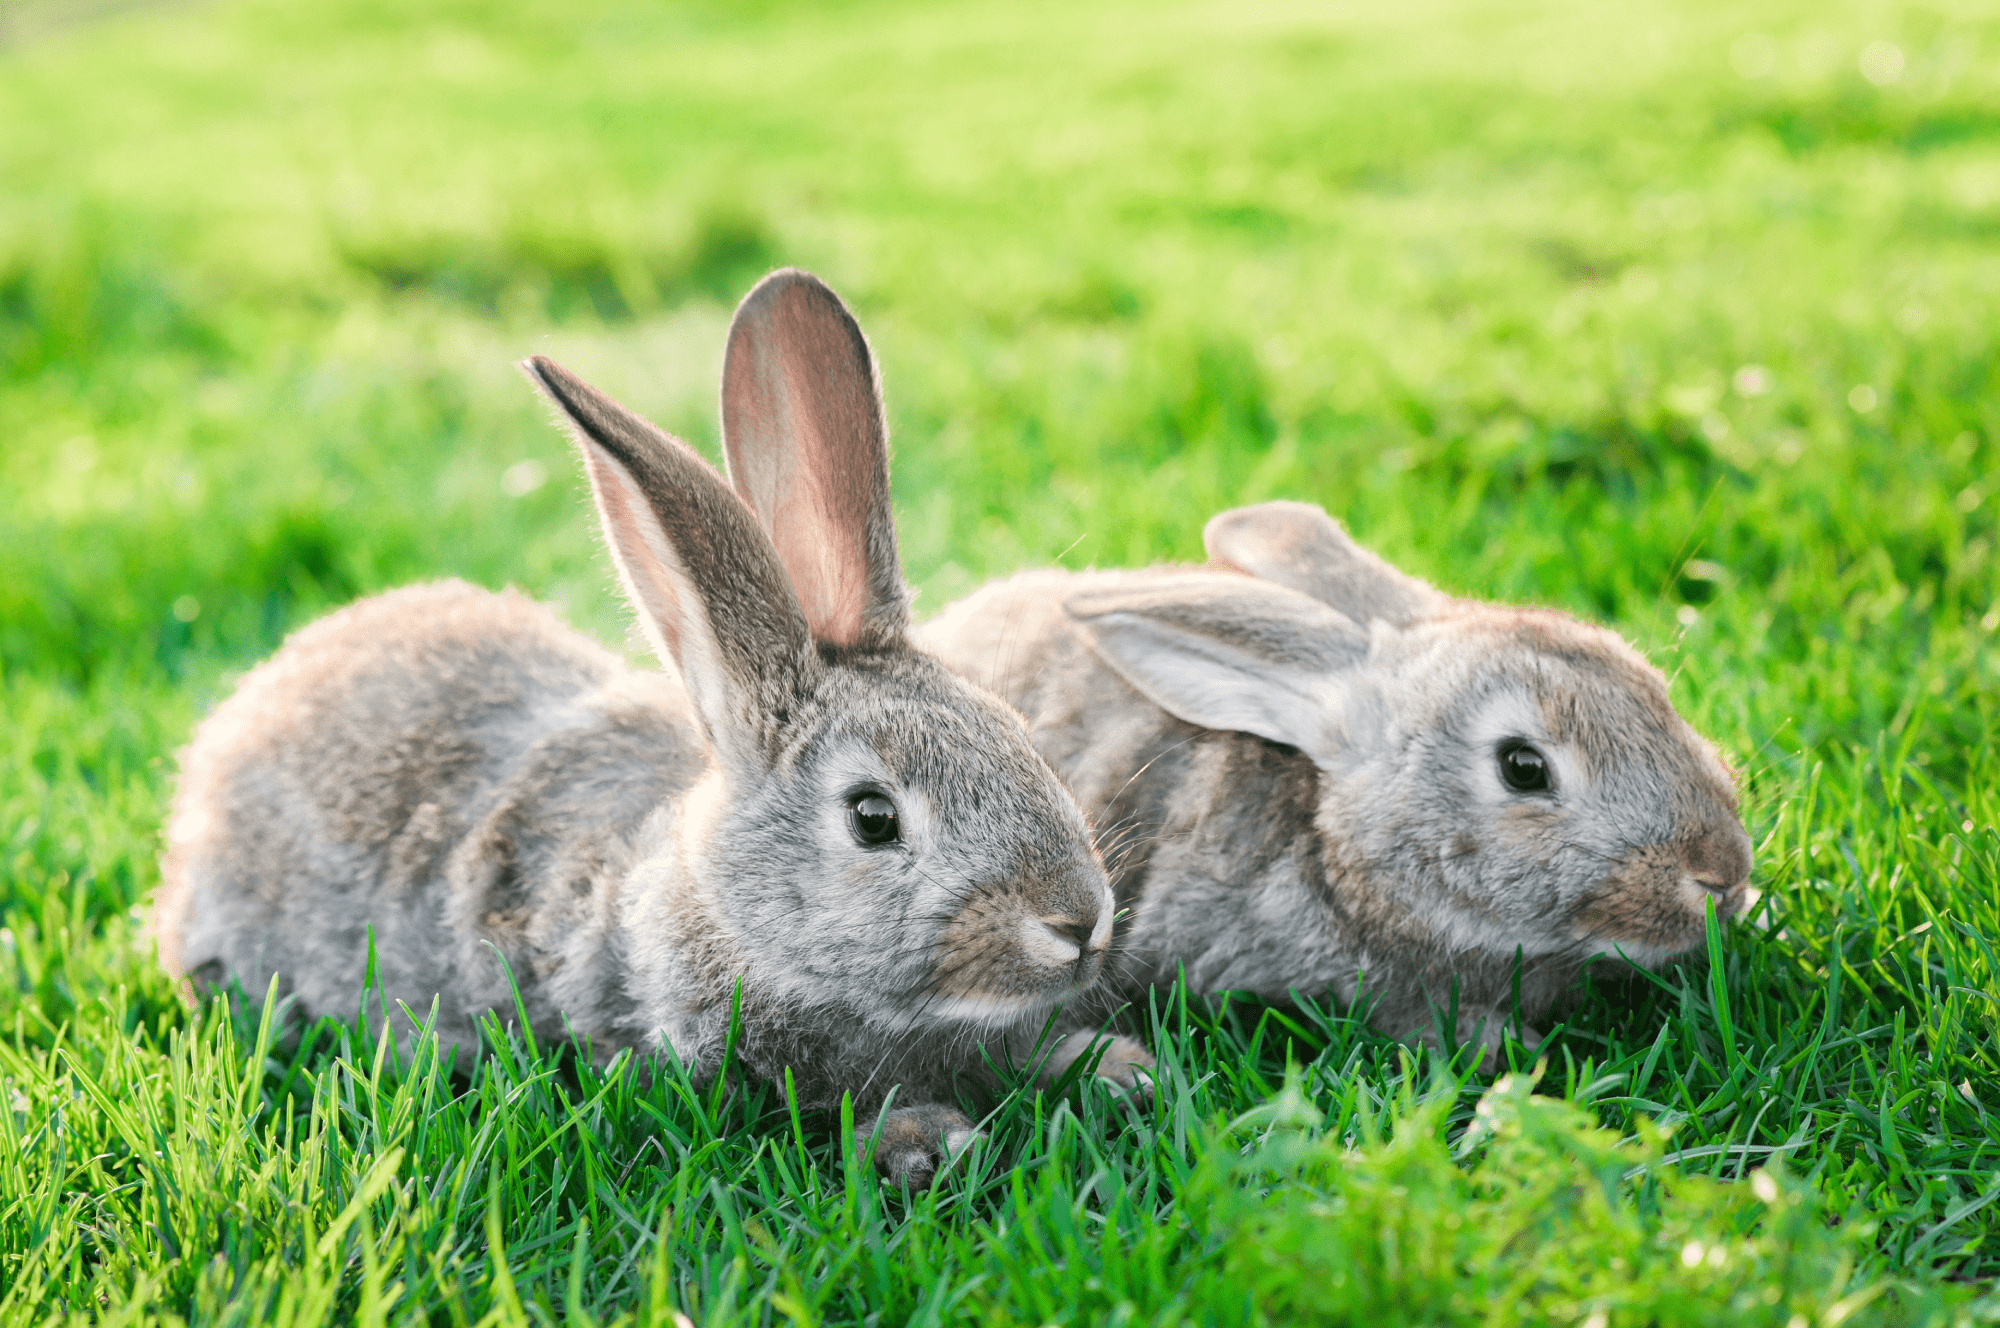 A photo of a pair of rabbits grazing outside on the grass